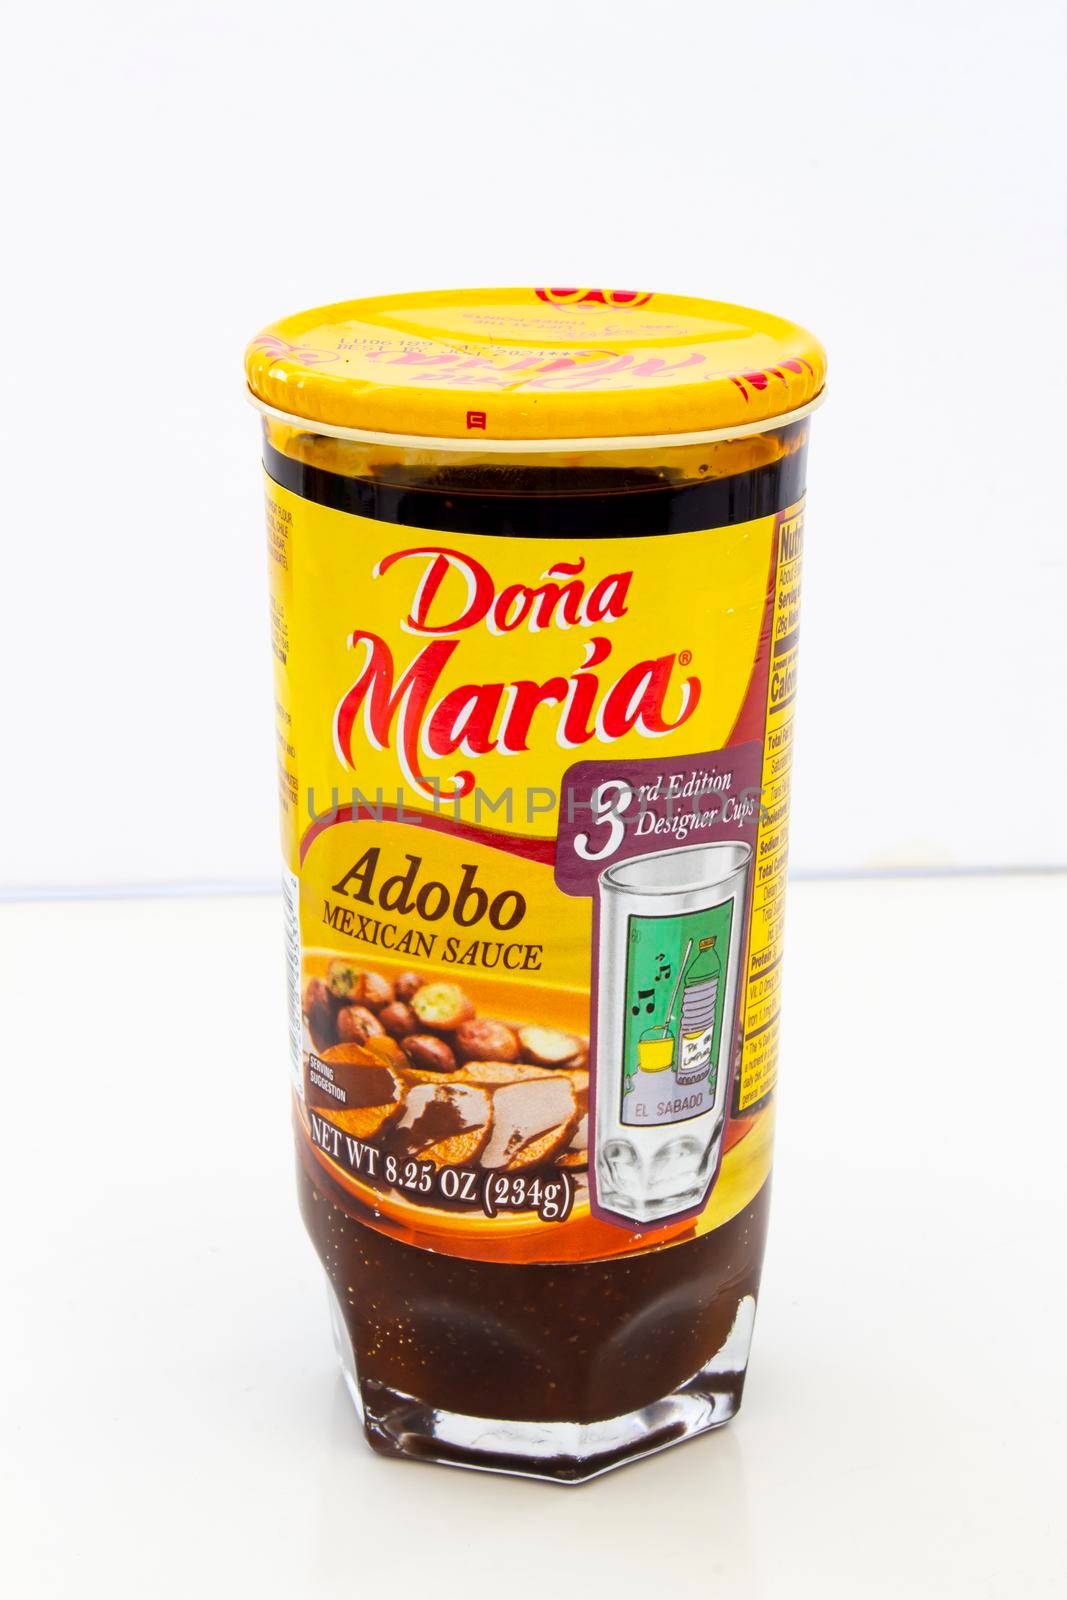 Calgary, Alberta, Canada. April 21, 2021. Dona Maria, Adobo Sauce is a rich, reddish brown, earthy flavored sauce synonymous with chipotle peppers. A traditional Mexican sauce. by oasisamuel